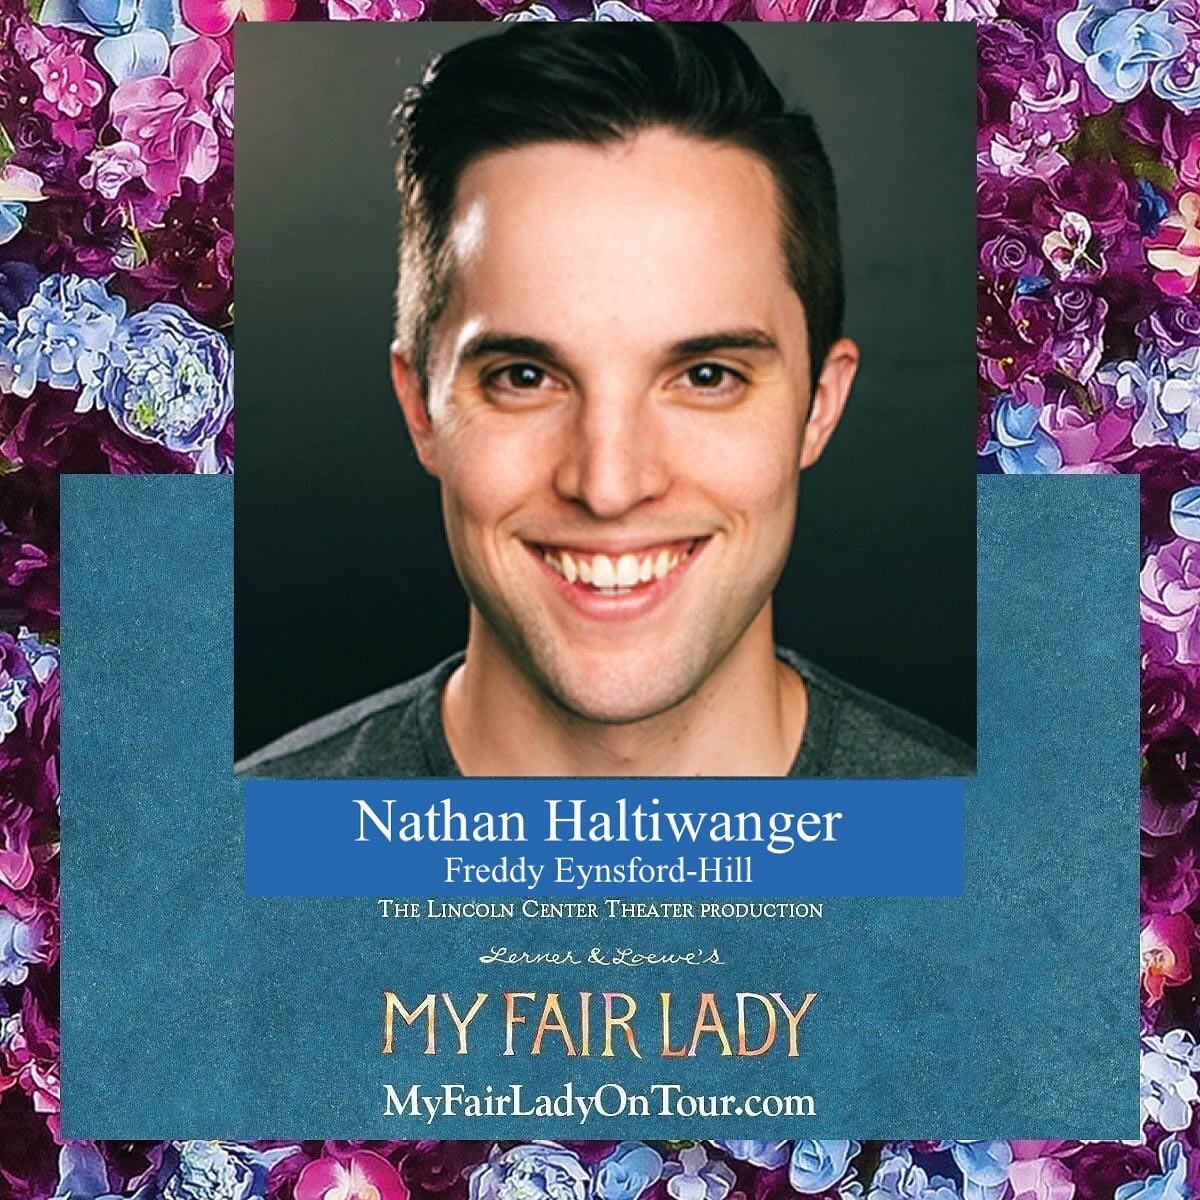 Very excited to finally be able to announce that I will be joining the touring cast of My Fair Lady as Freddy Eynsford-Hill! So grateful to the cast for welcoming me into their family. Special thanks to @bindercasting @brooklynnosh and the entire @mf